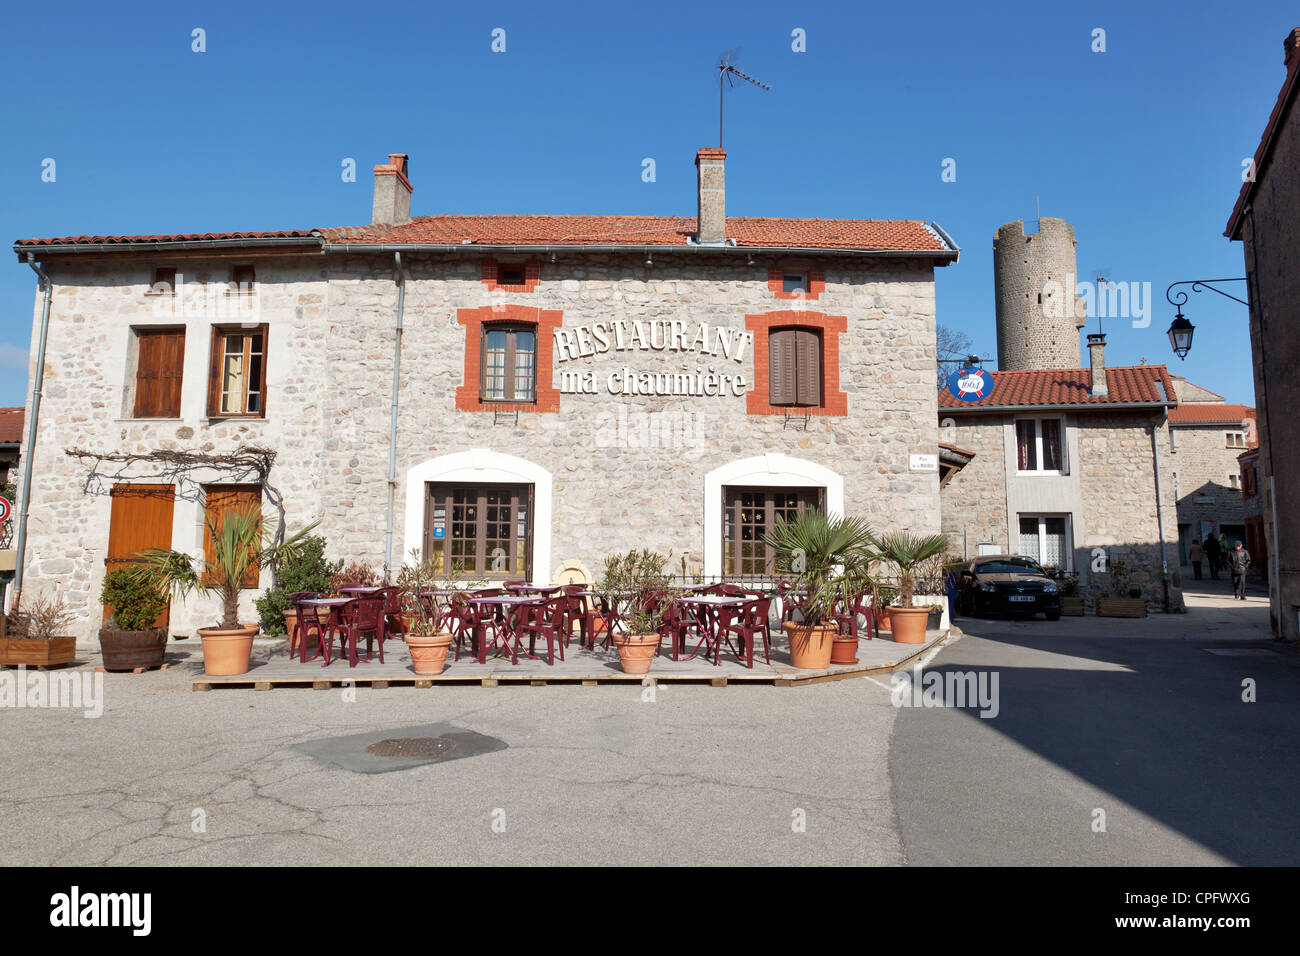 Restaurant ma chaumiere in medieval village of Chambles near Saint-Etienne, France Stock Photo